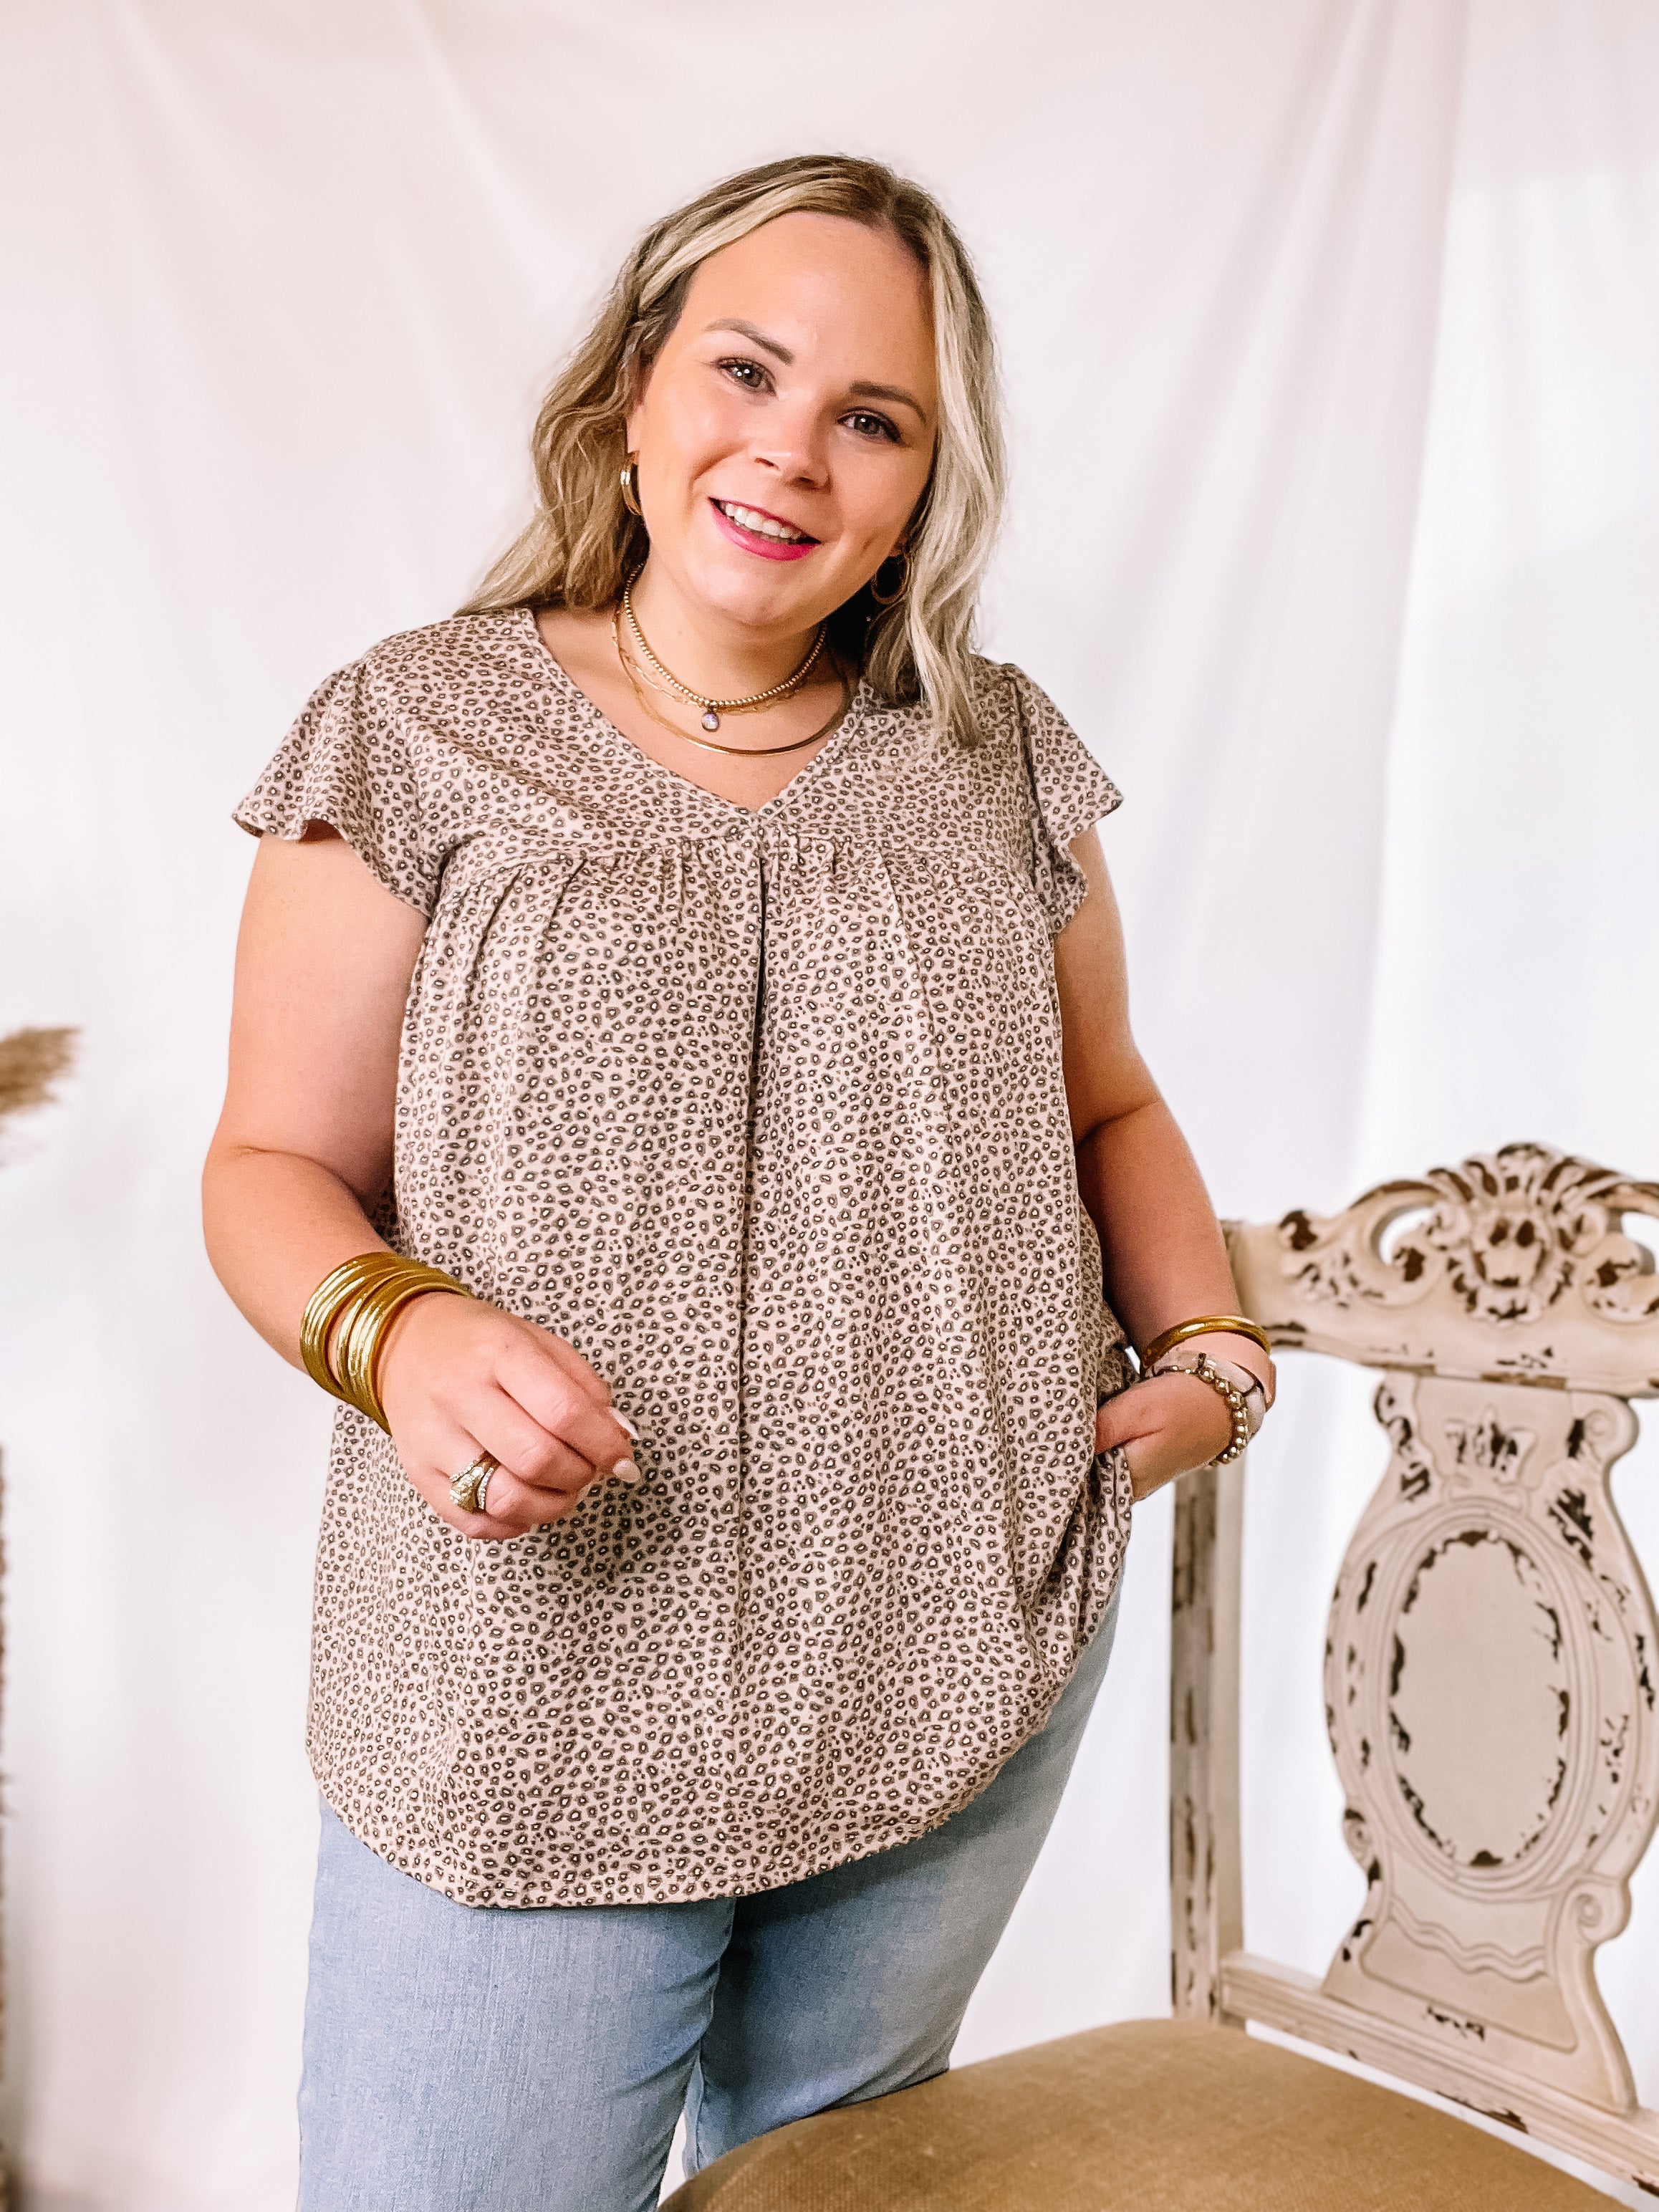 Look Who's Trending Small Leopard Print V Neck Top with Ruffle Cap Sleeves - Giddy Up Glamour Boutique